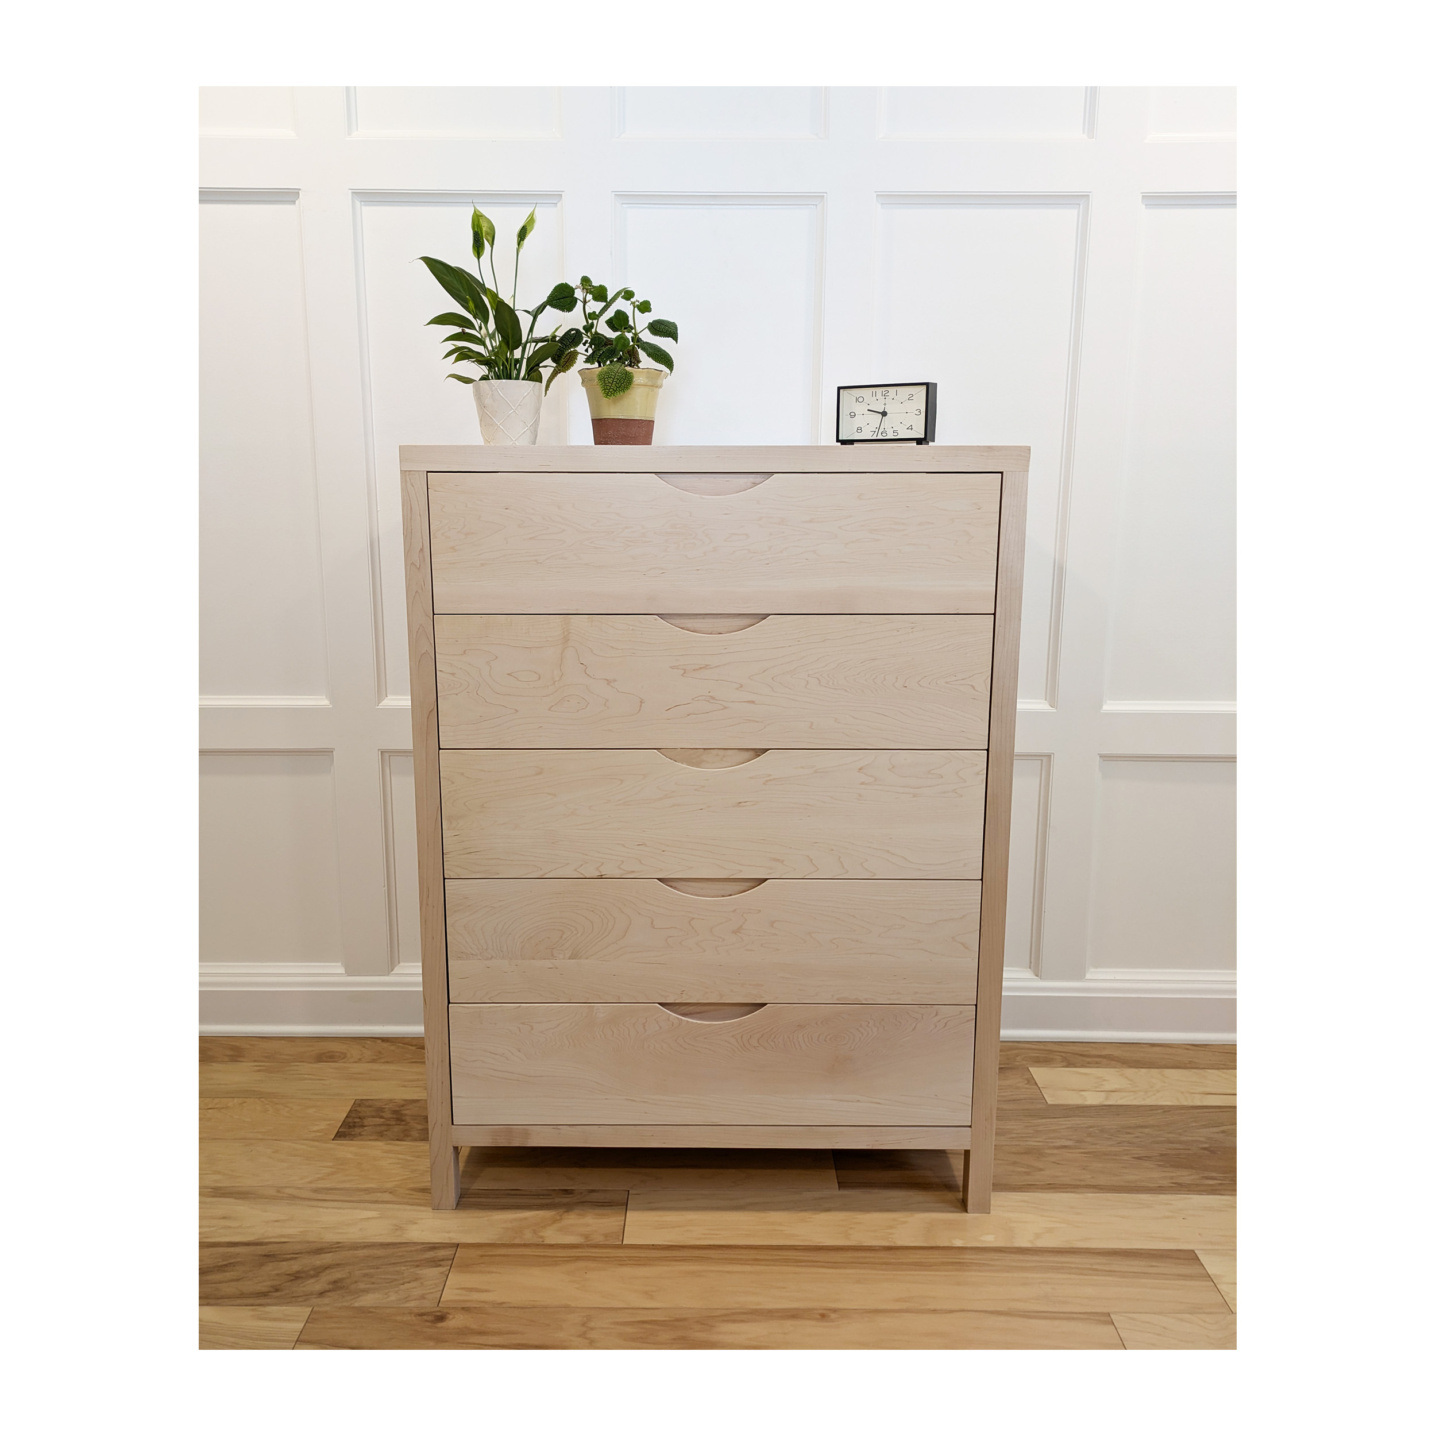 Maple Chest of drawers with made with domestic woods